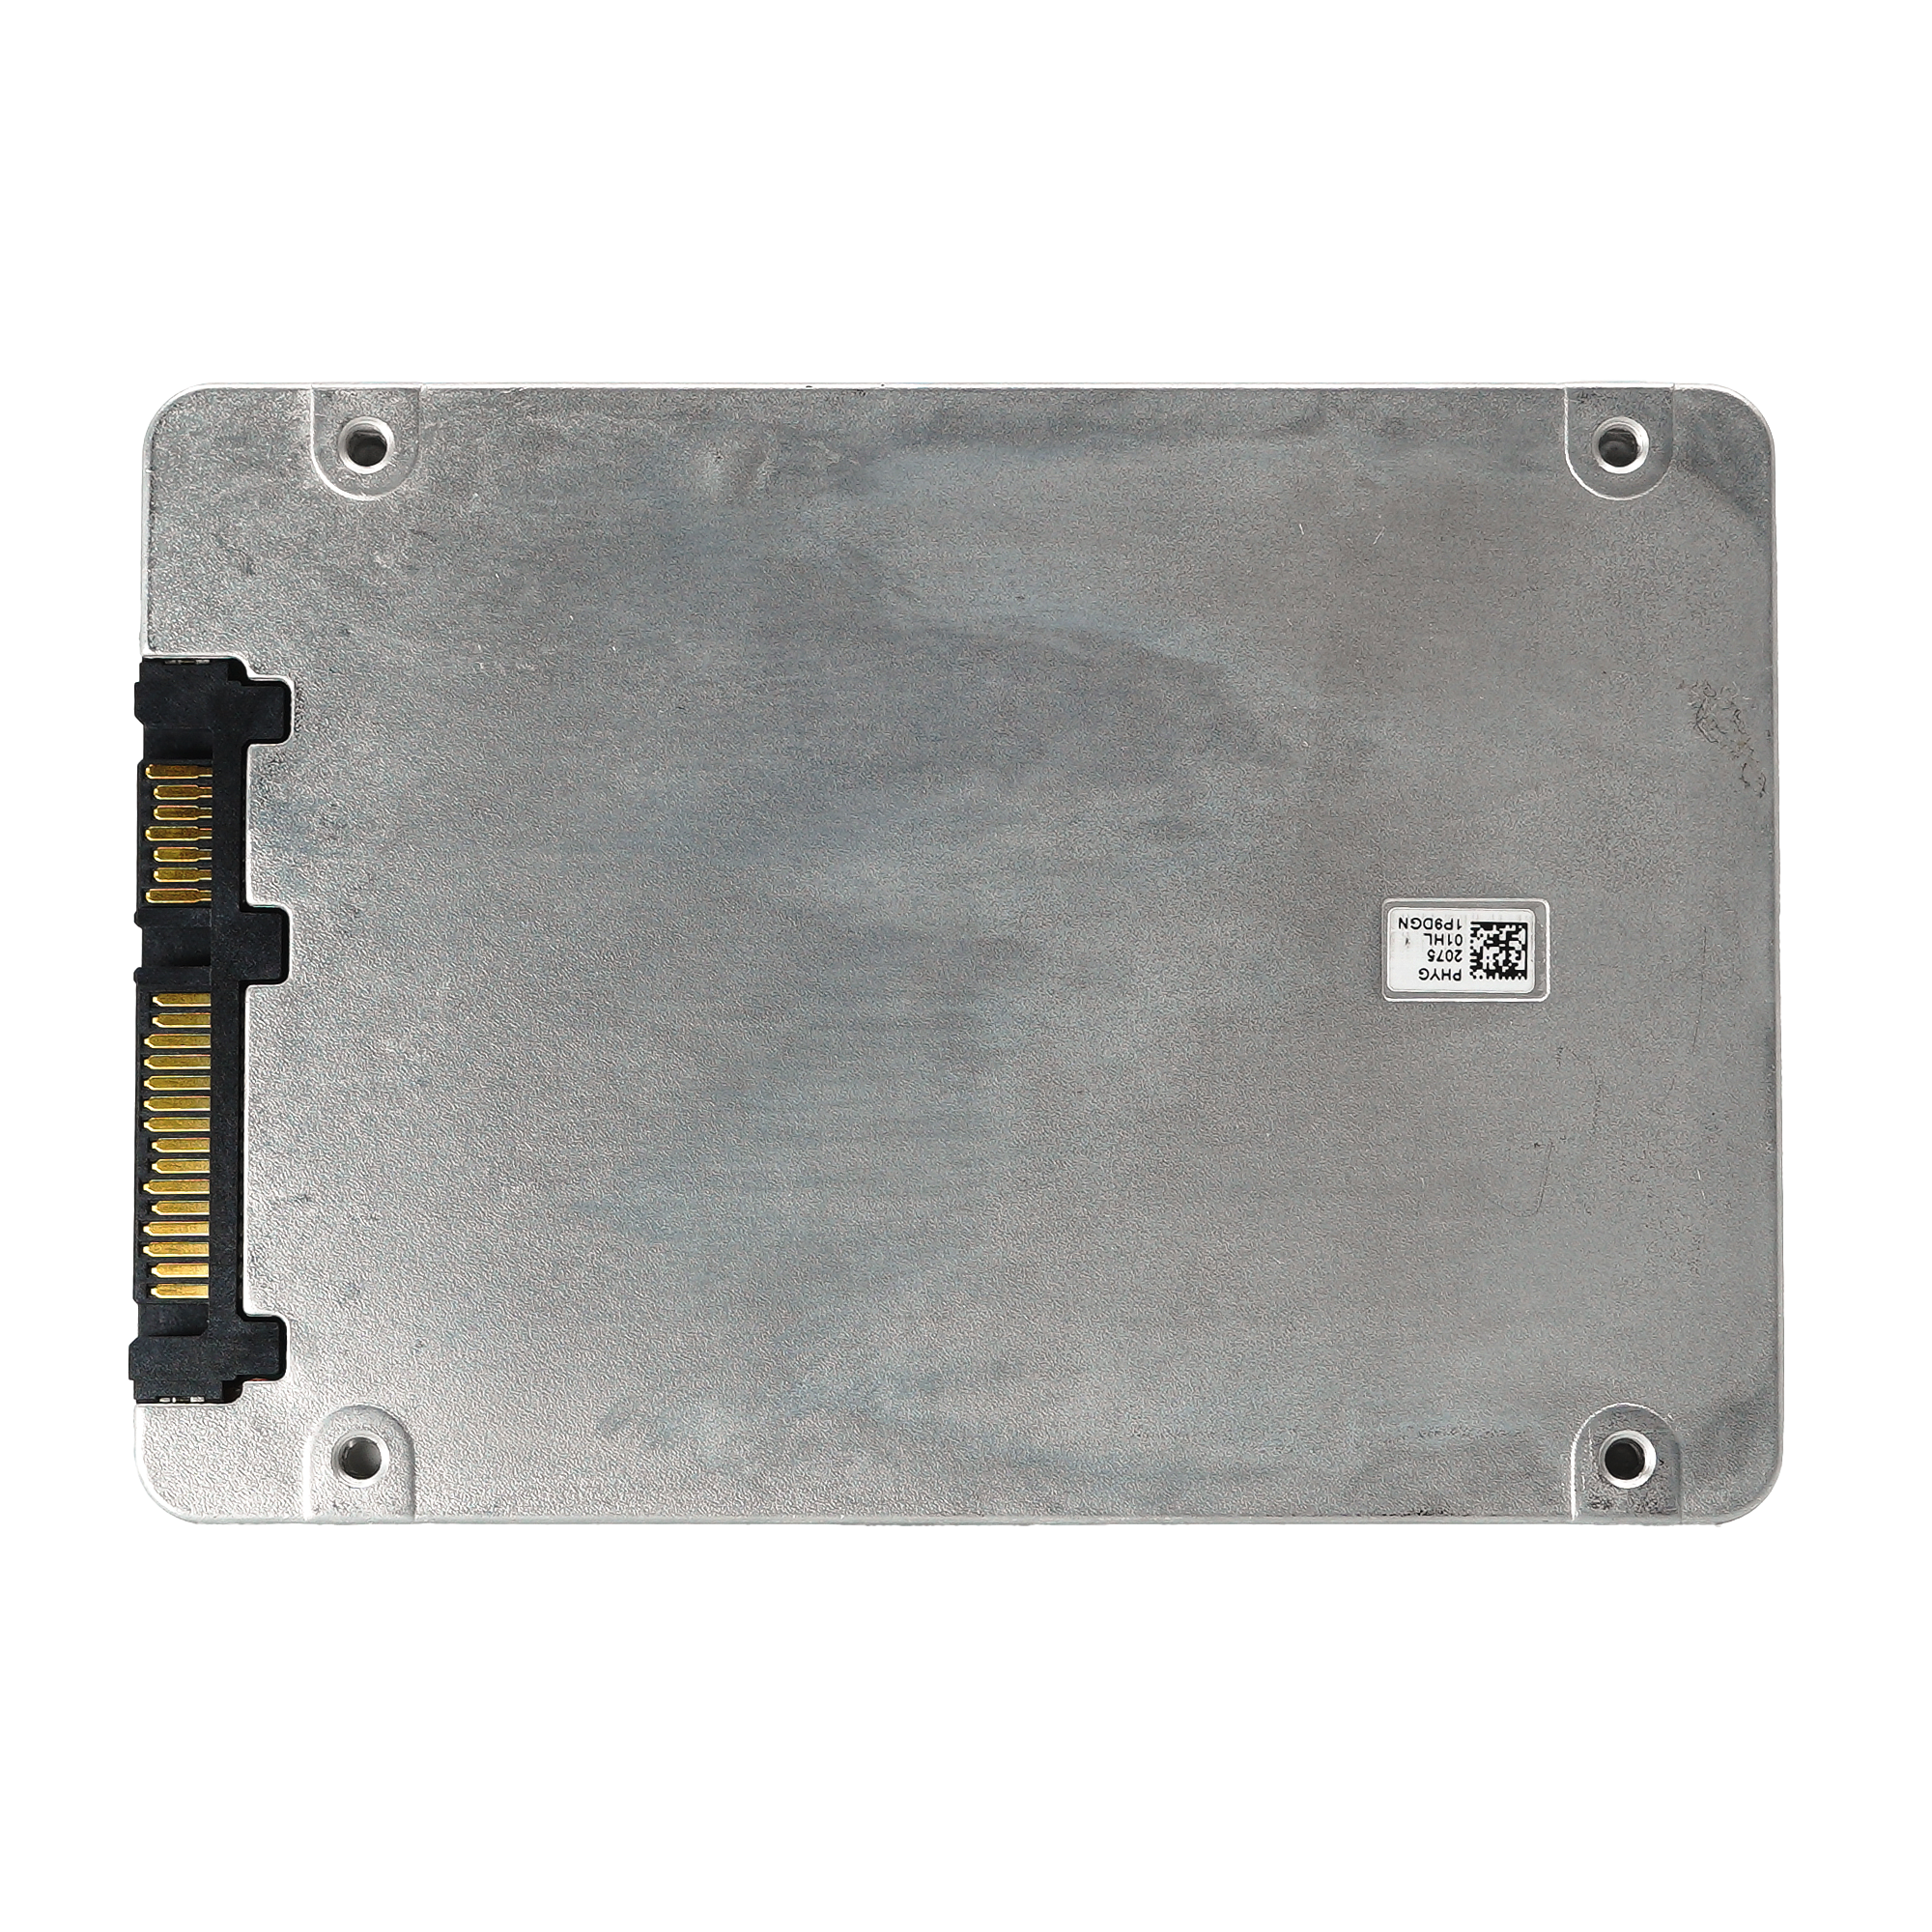 Dell S4610 55J8H SSDSC2KG019T8R 1.92TB SATA 6Gb/s 3DWPD Mixed Use 2.5in Refurbished SSD - Rear View